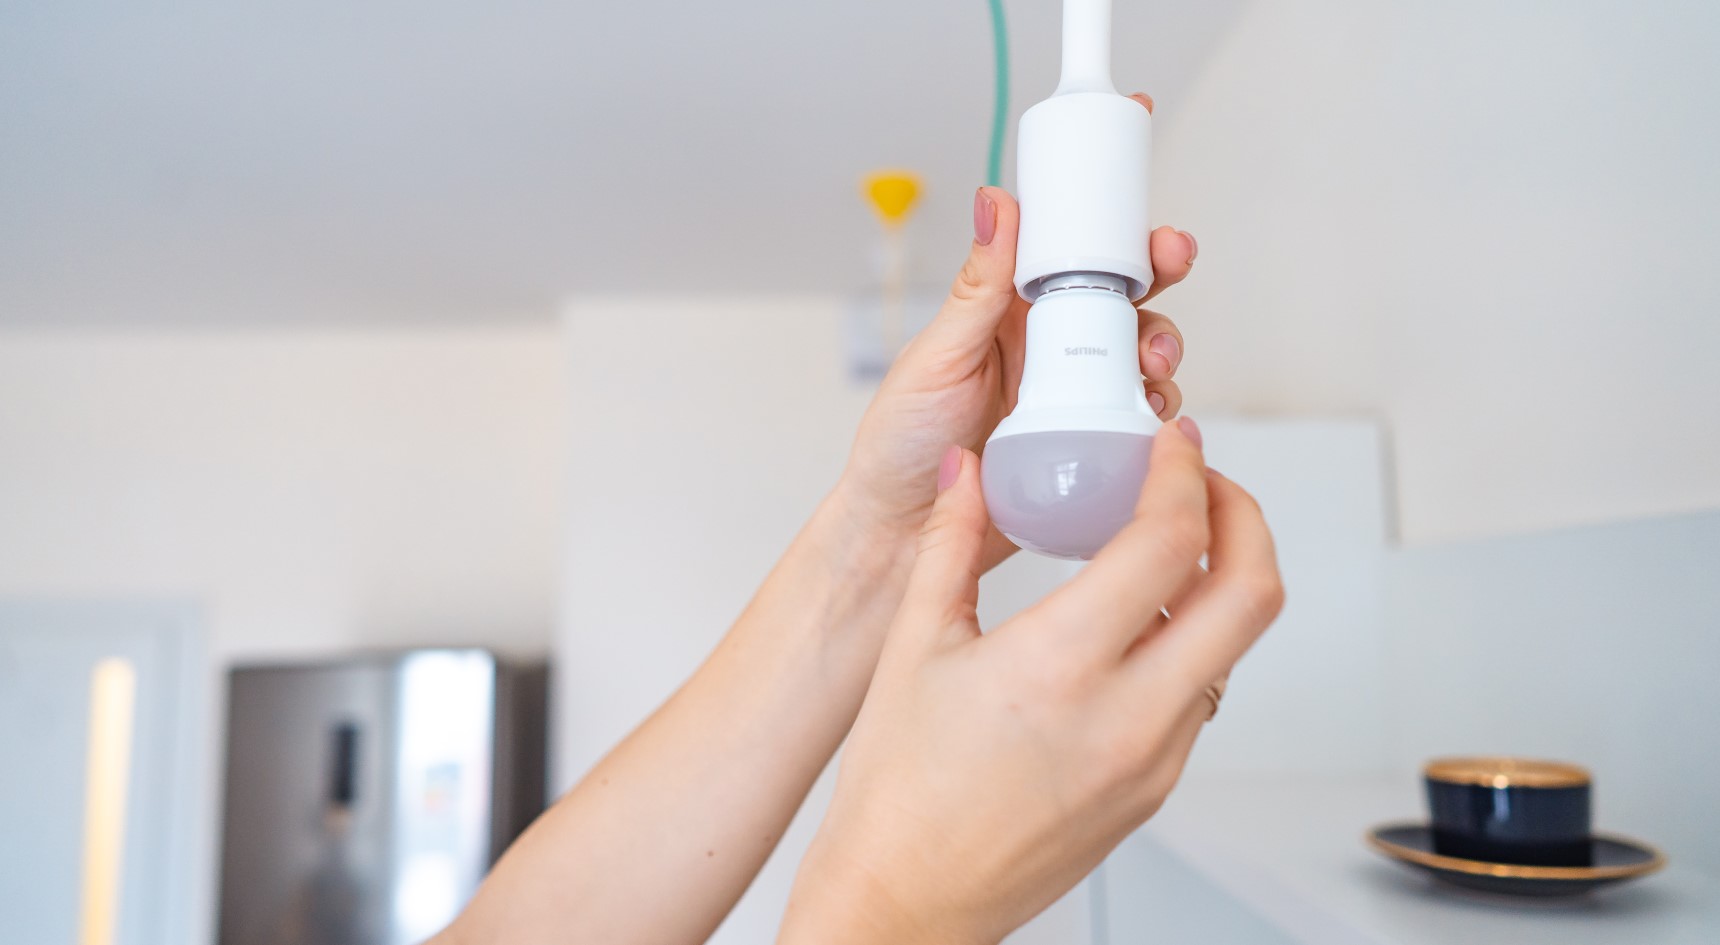 Switching to LED lights in your home can be a great energy and money saver. Image: Getty.